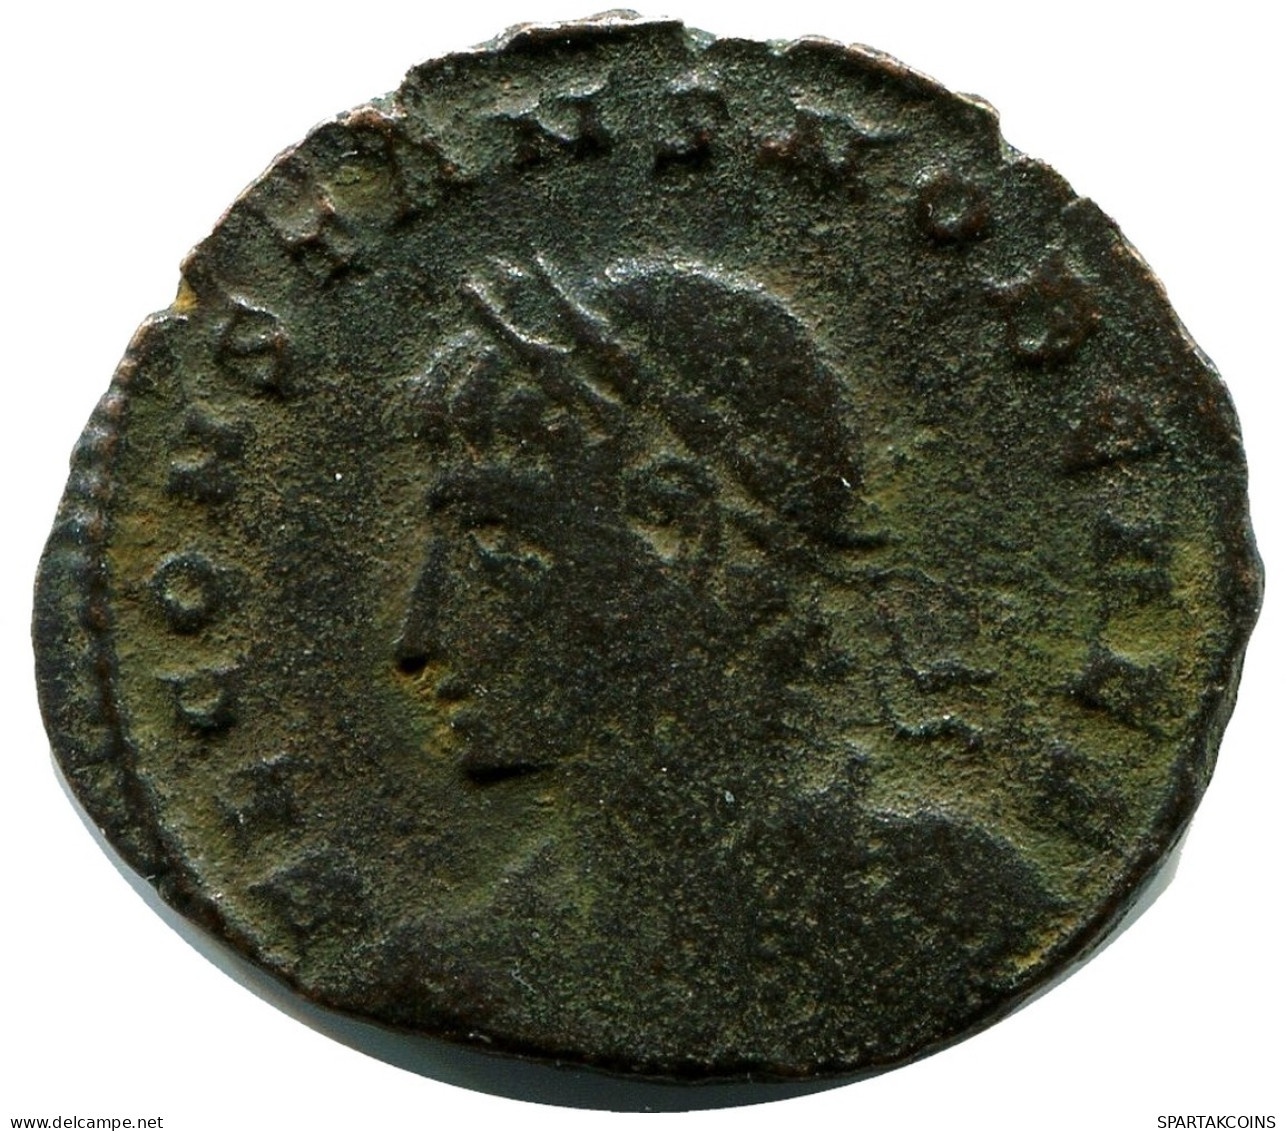 CONSTANS MINTED IN CONSTANTINOPLE FOUND IN IHNASYAH HOARD EGYPT #ANC11944.14.U.A - The Christian Empire (307 AD To 363 AD)